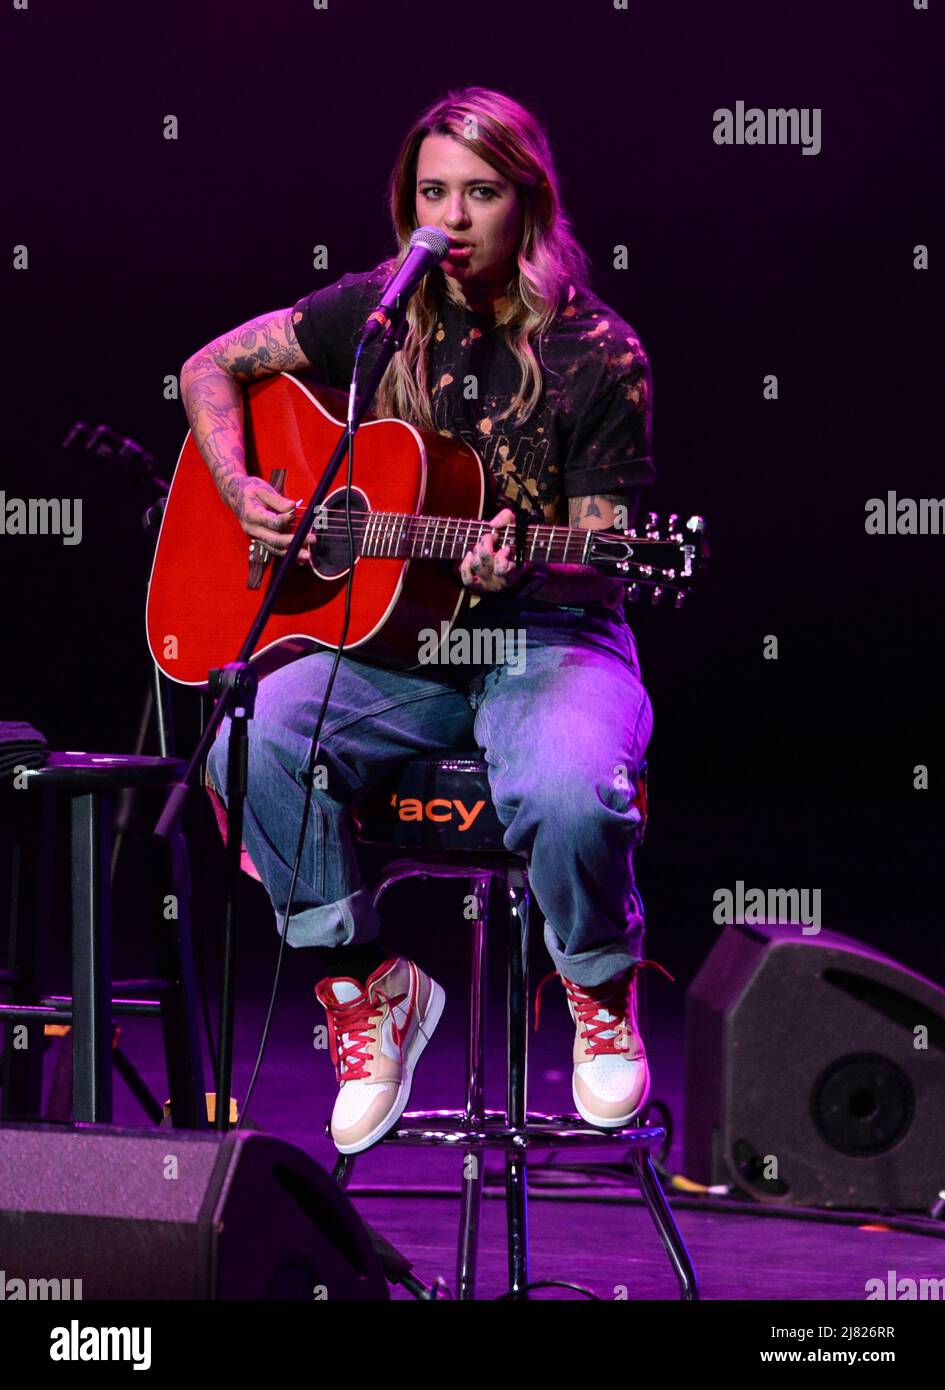 Hollywood FL, USA. 11th May, 2022. Morgan Wade performs during the Audacy 'Leading Ladies' of country concert at Hard Rock Live held at the Seminole Hard Rock Hotel & Casino on May 11, 2022 in Hollywood, Florida. Credit: Mpi04/Media Punch/Alamy Live News Stock Photo